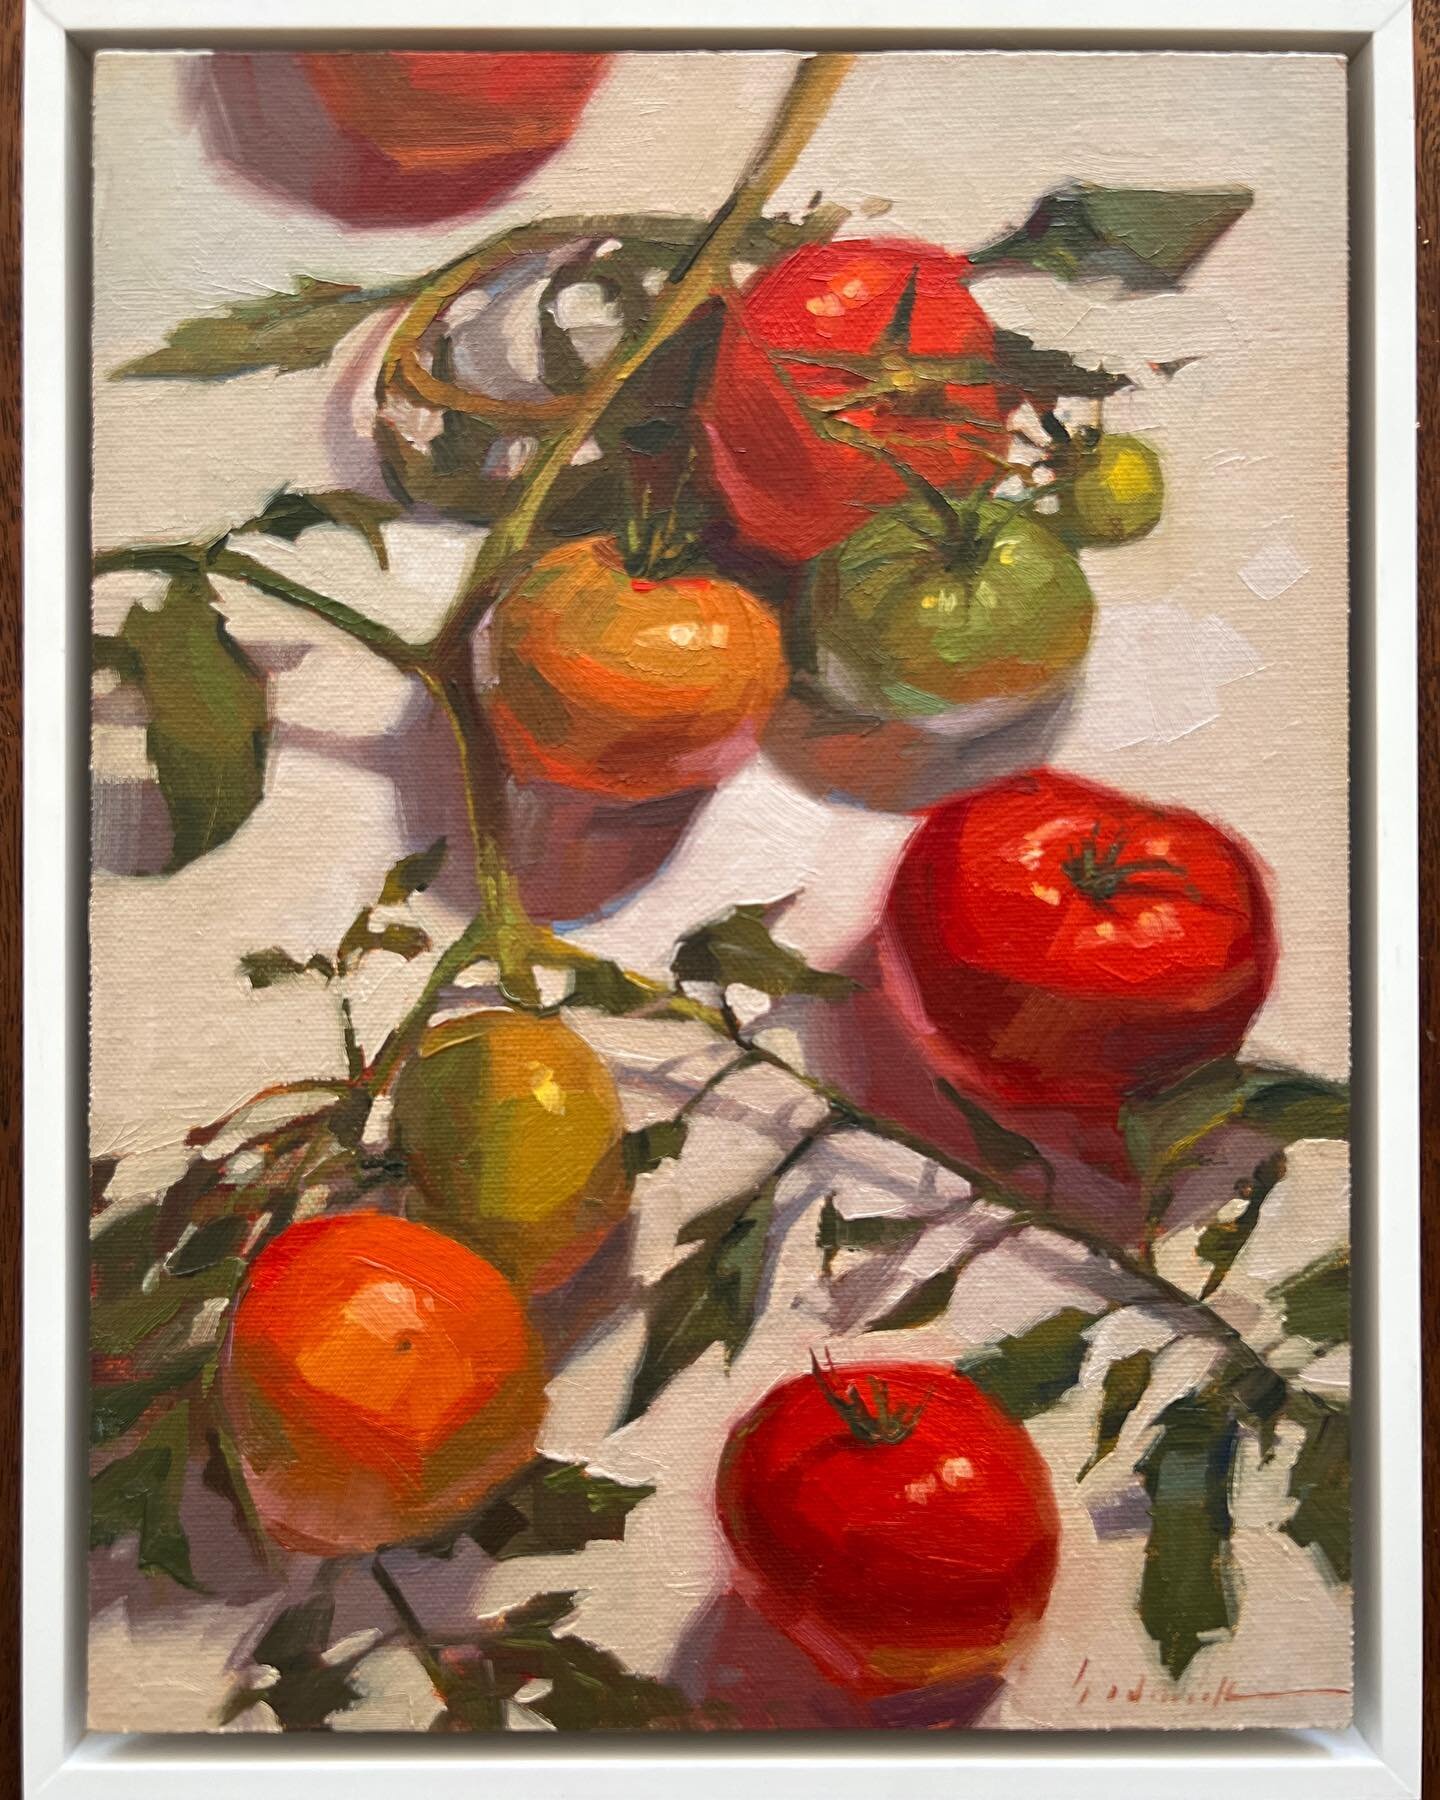 @sedwickstudio - &ldquo;Tomato Tango&rdquo; - 9x12&rdquo; oil framed in this beautiful white float frame - Available